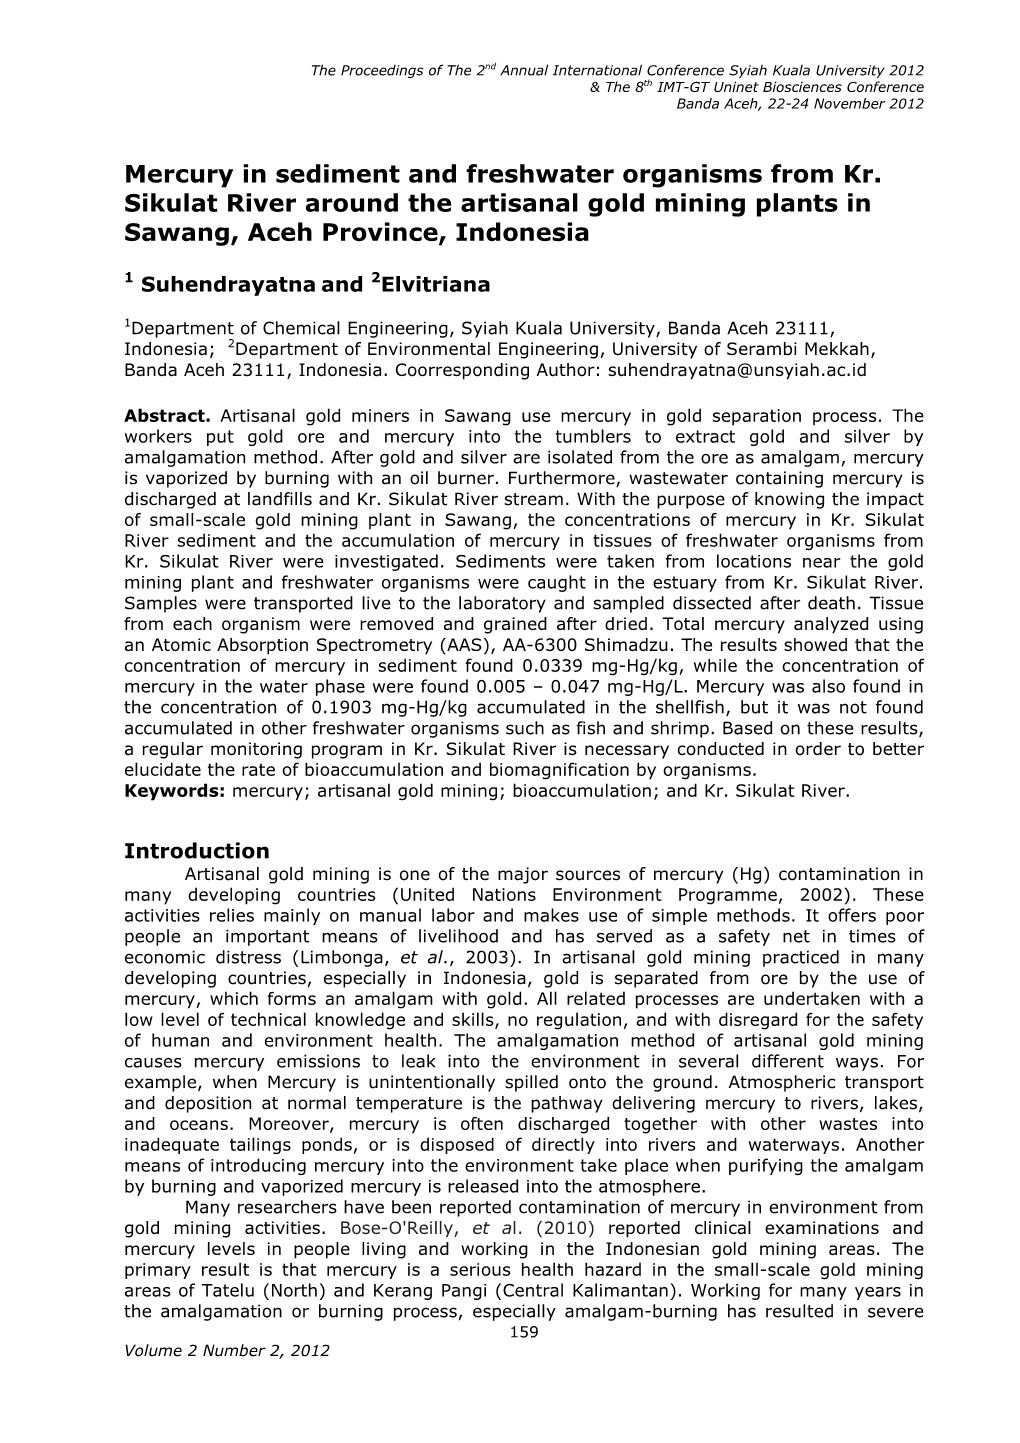 Mercury in Sediment and Freshwater Organisms from Kr. Sikulat River Around the Artisanal Gold Mining Plants in Sawang, Aceh Province, Indonesia